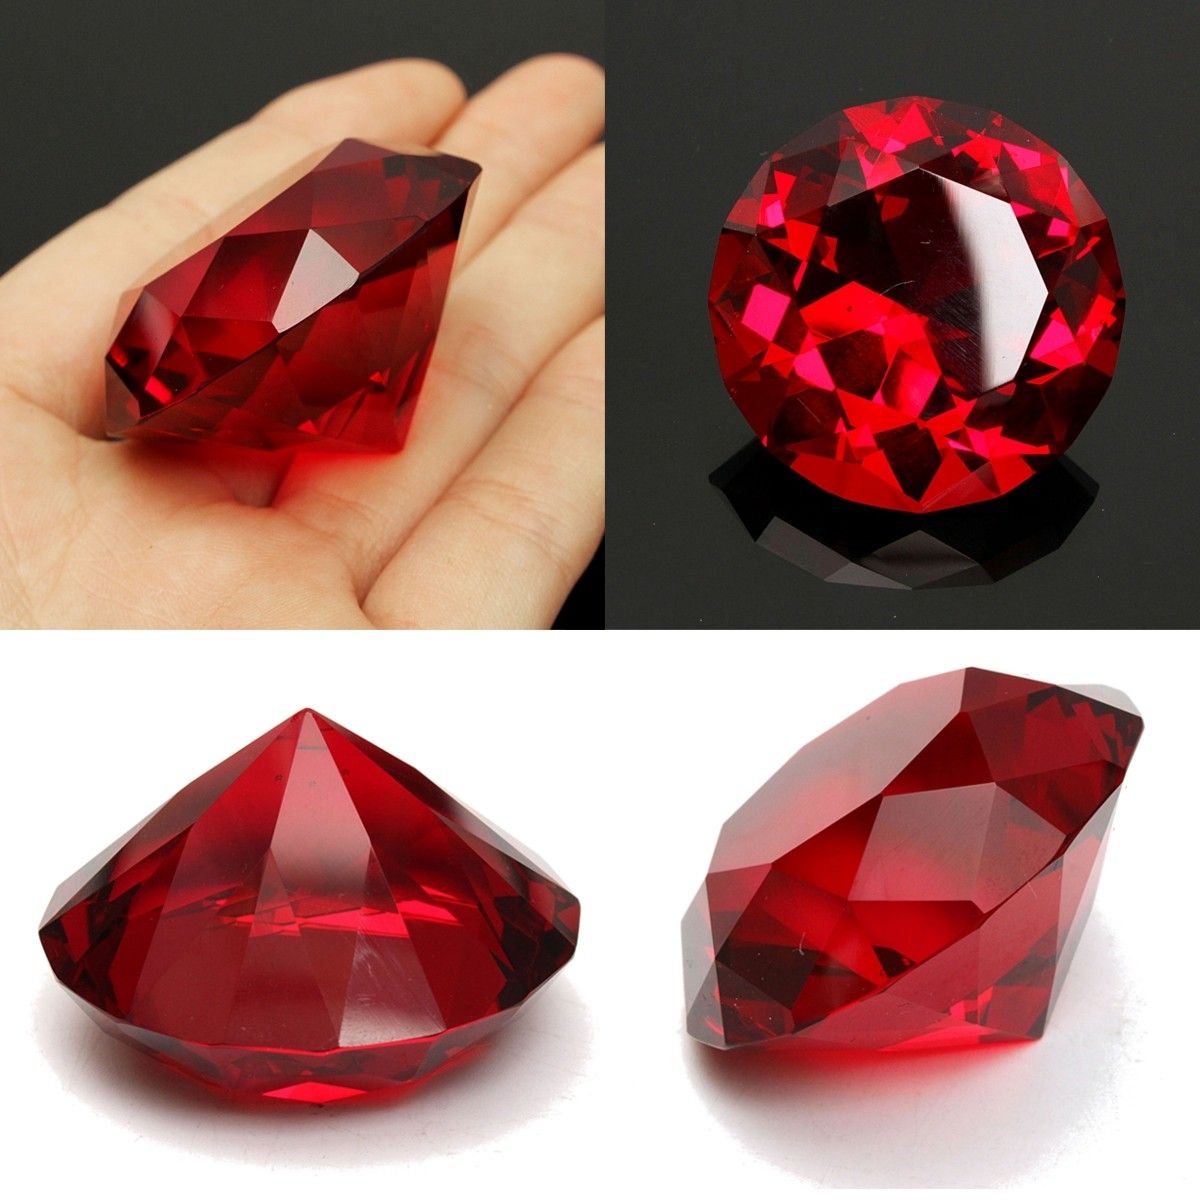 Red-Diamond-Shaped-Crystal-Glass-Art-Paperweight-Wedding-Favors-Shower-Home-Decor-40mm-1451072